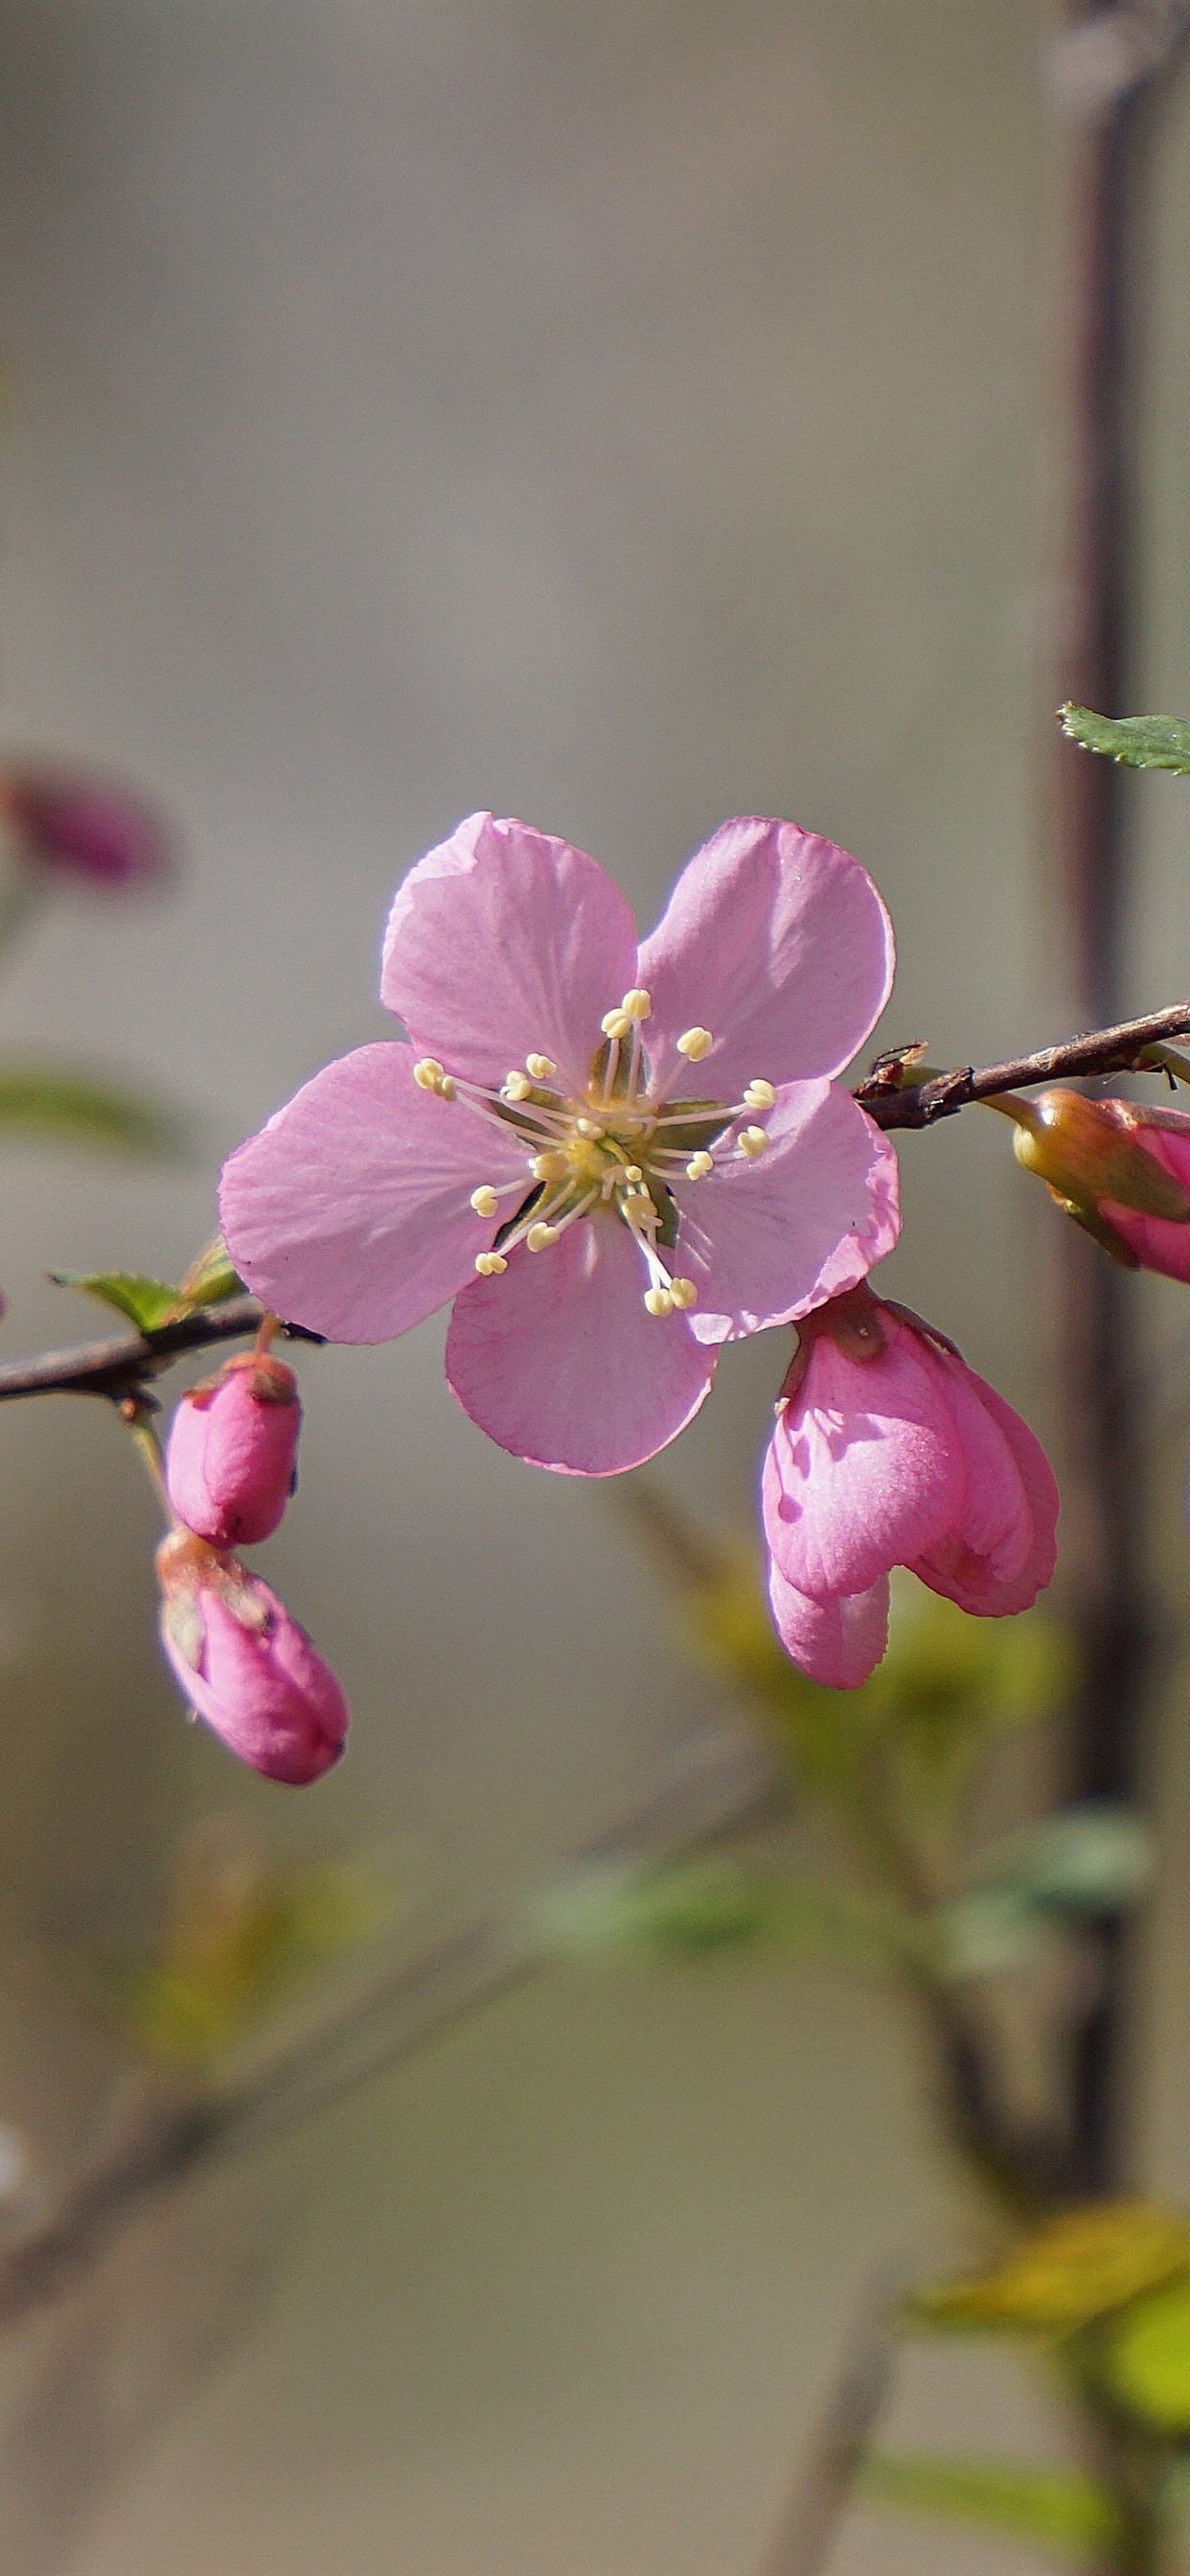 Pink Peach Flowers Bloom, Twigs, Spring 1242x2688 IPhone 11 Pro XS Max Wallpaper, Background, Picture, Image